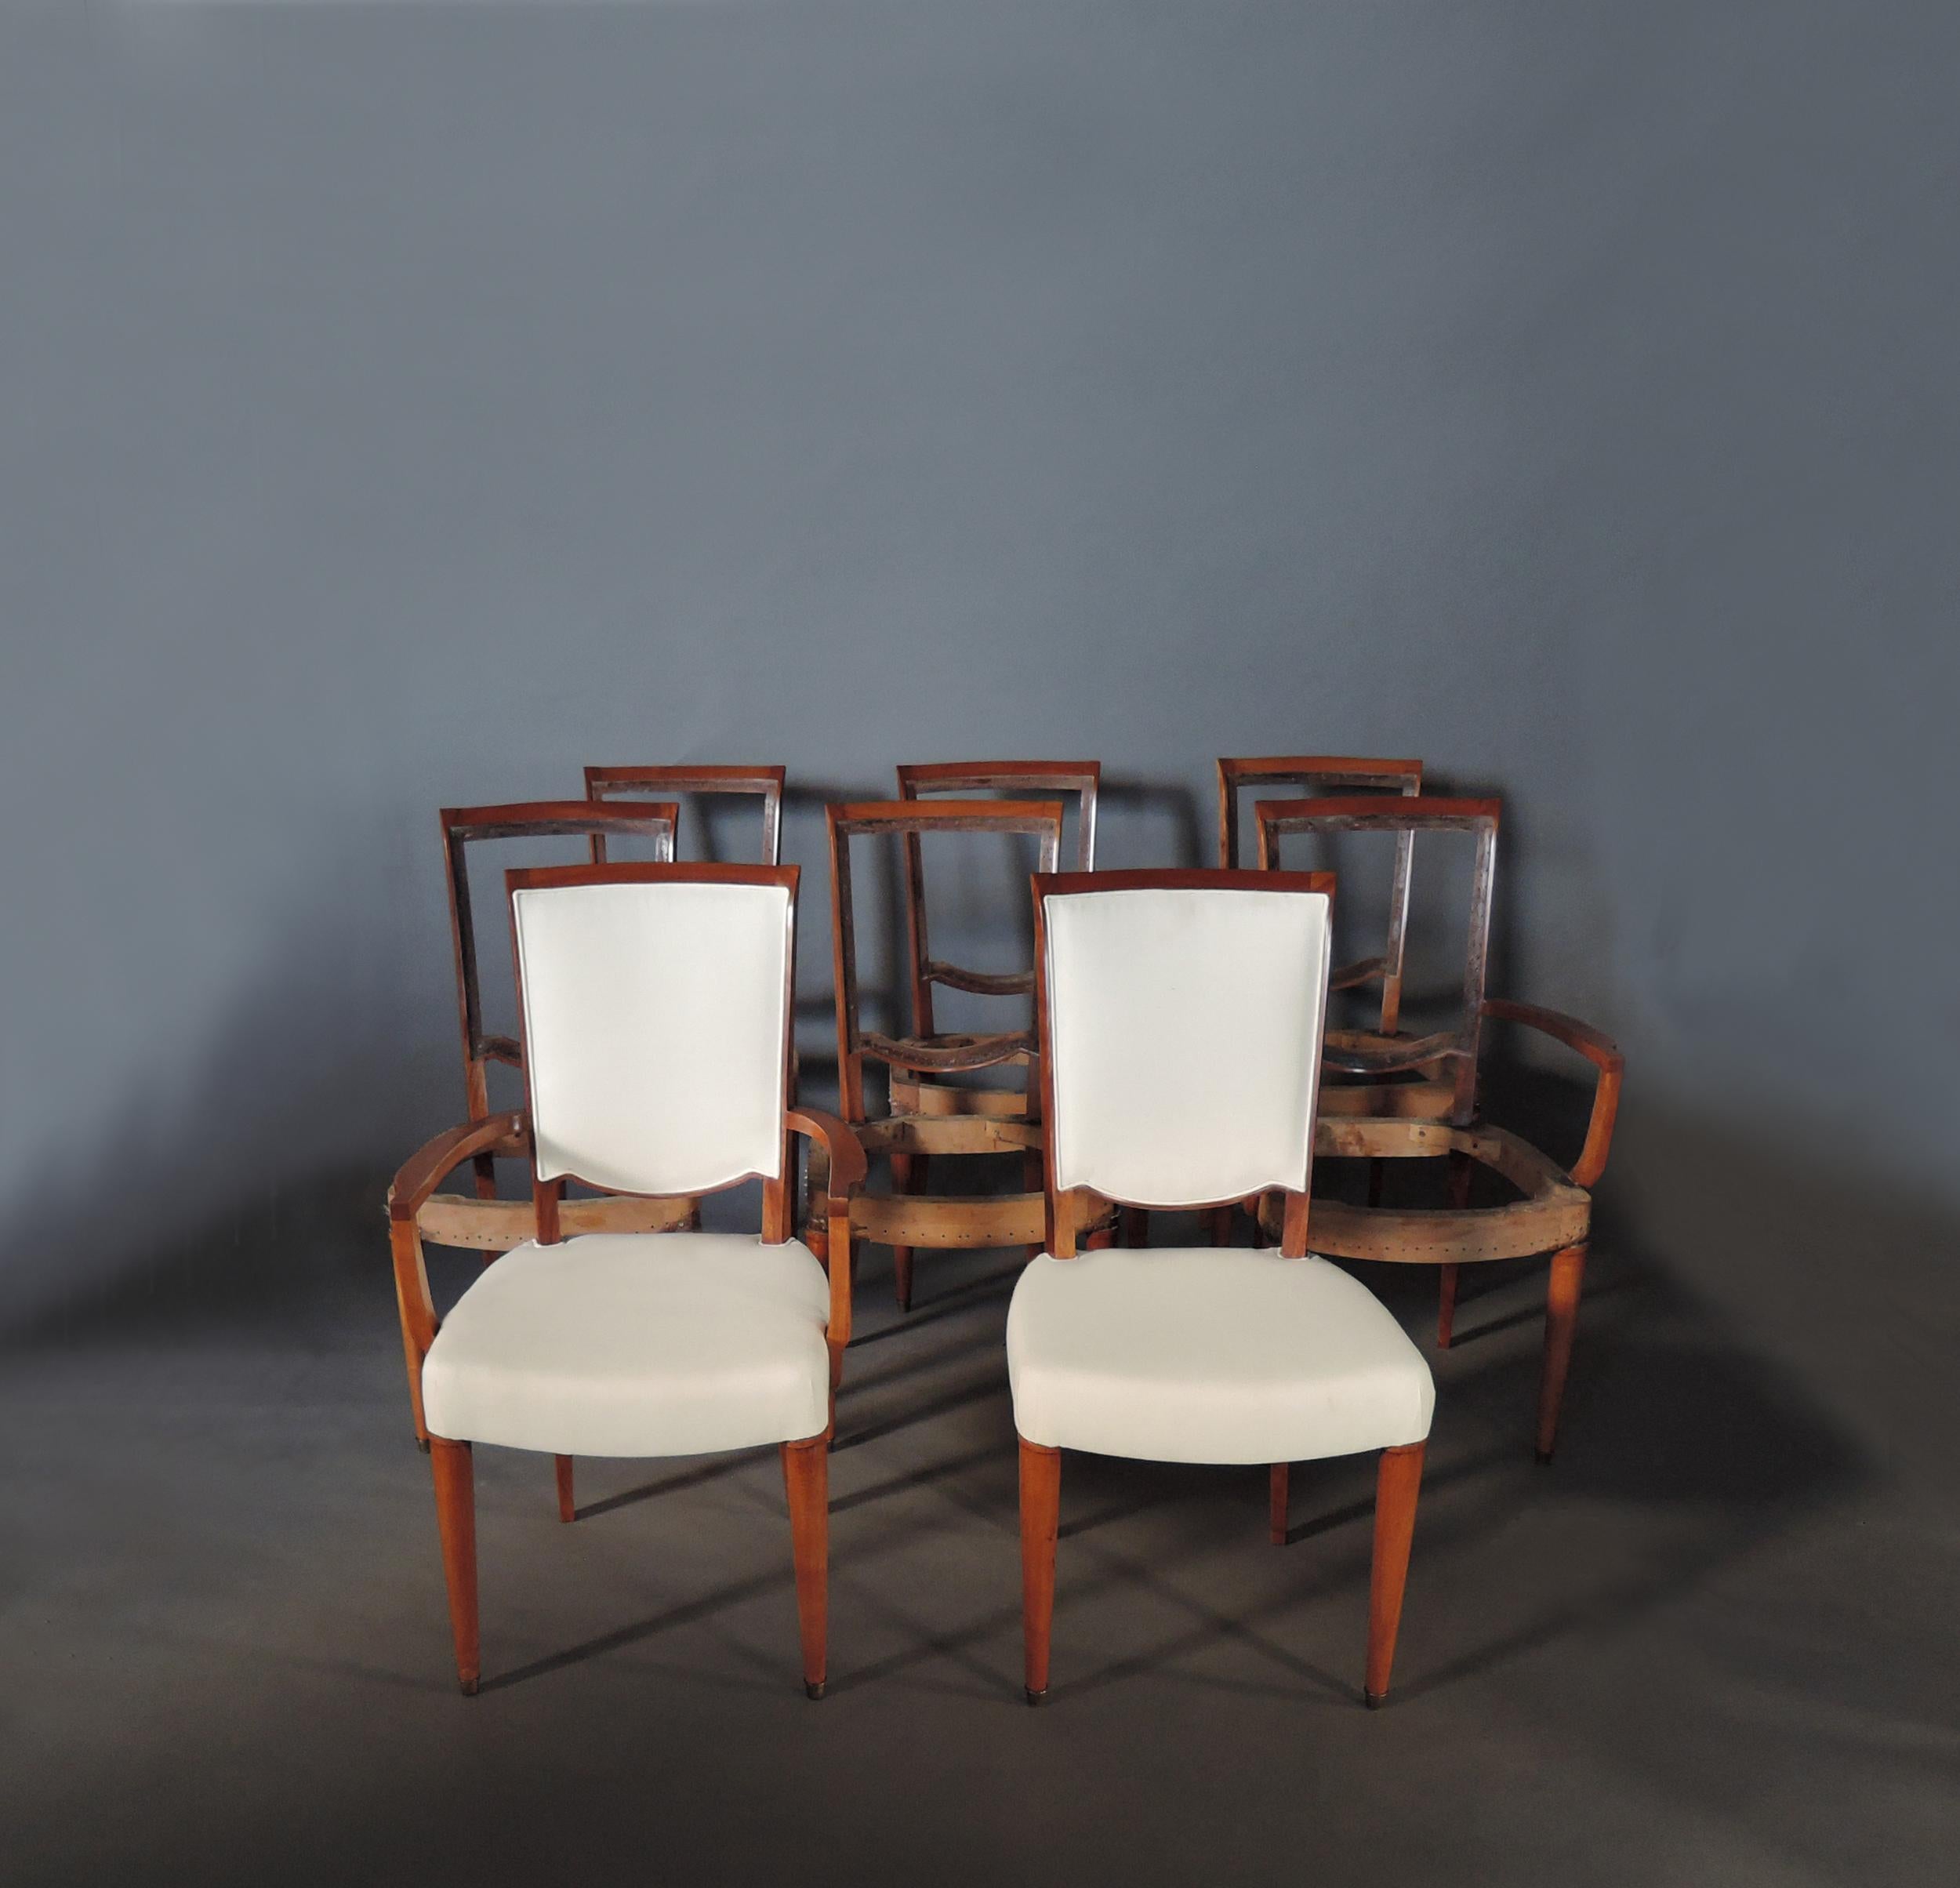 Jules Leleu (1883-1961) - A set of 8 fine French Art Deco mahogany dining chairs (6 side and 2 arm). Documented


Armchair dimensions:
H 35 5/8